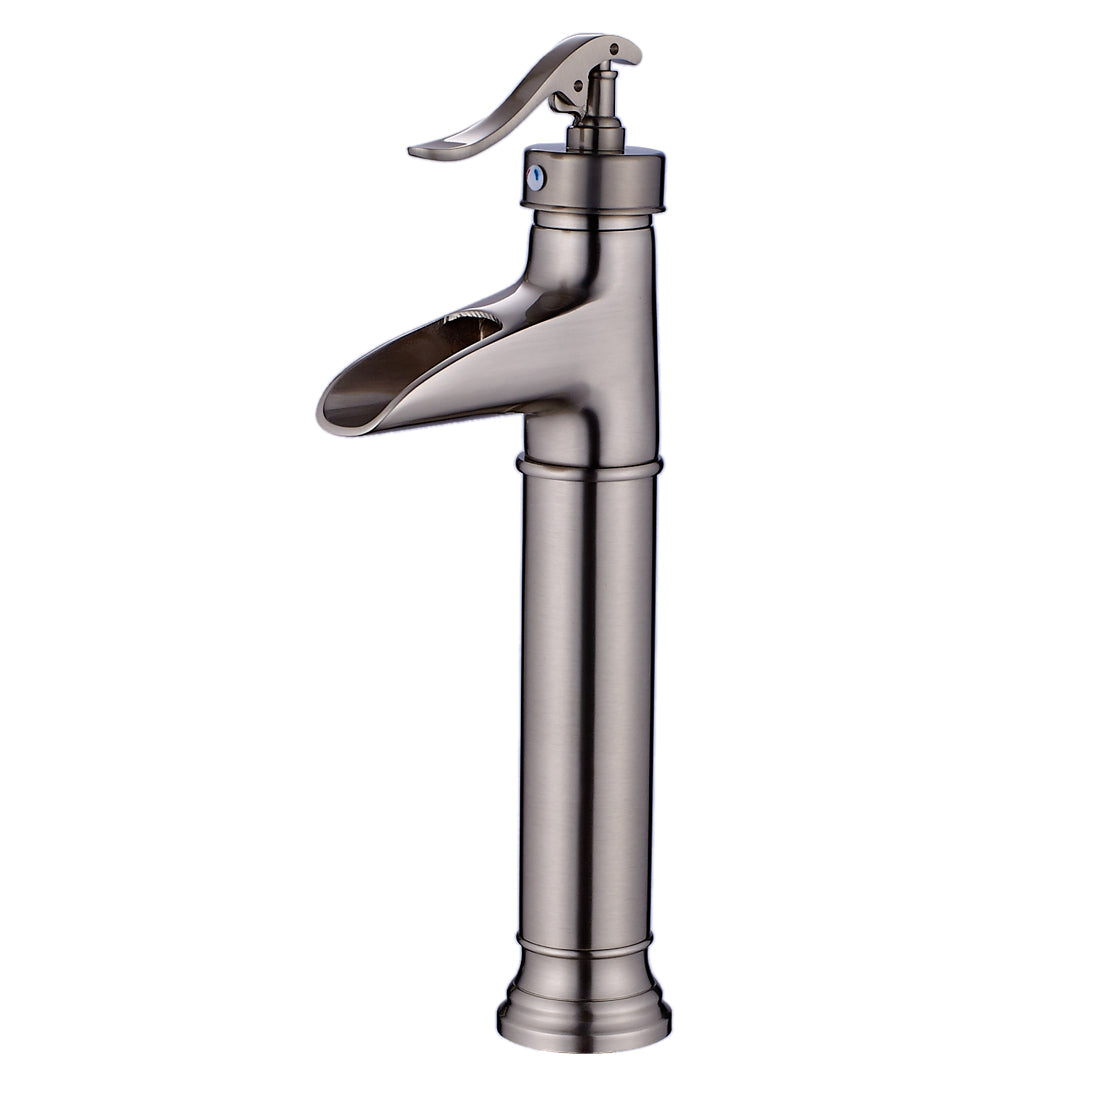 Modern Classic Black Ceramic Bathroom Faucet with Brushed Nickel Finish and Waterfall Spout